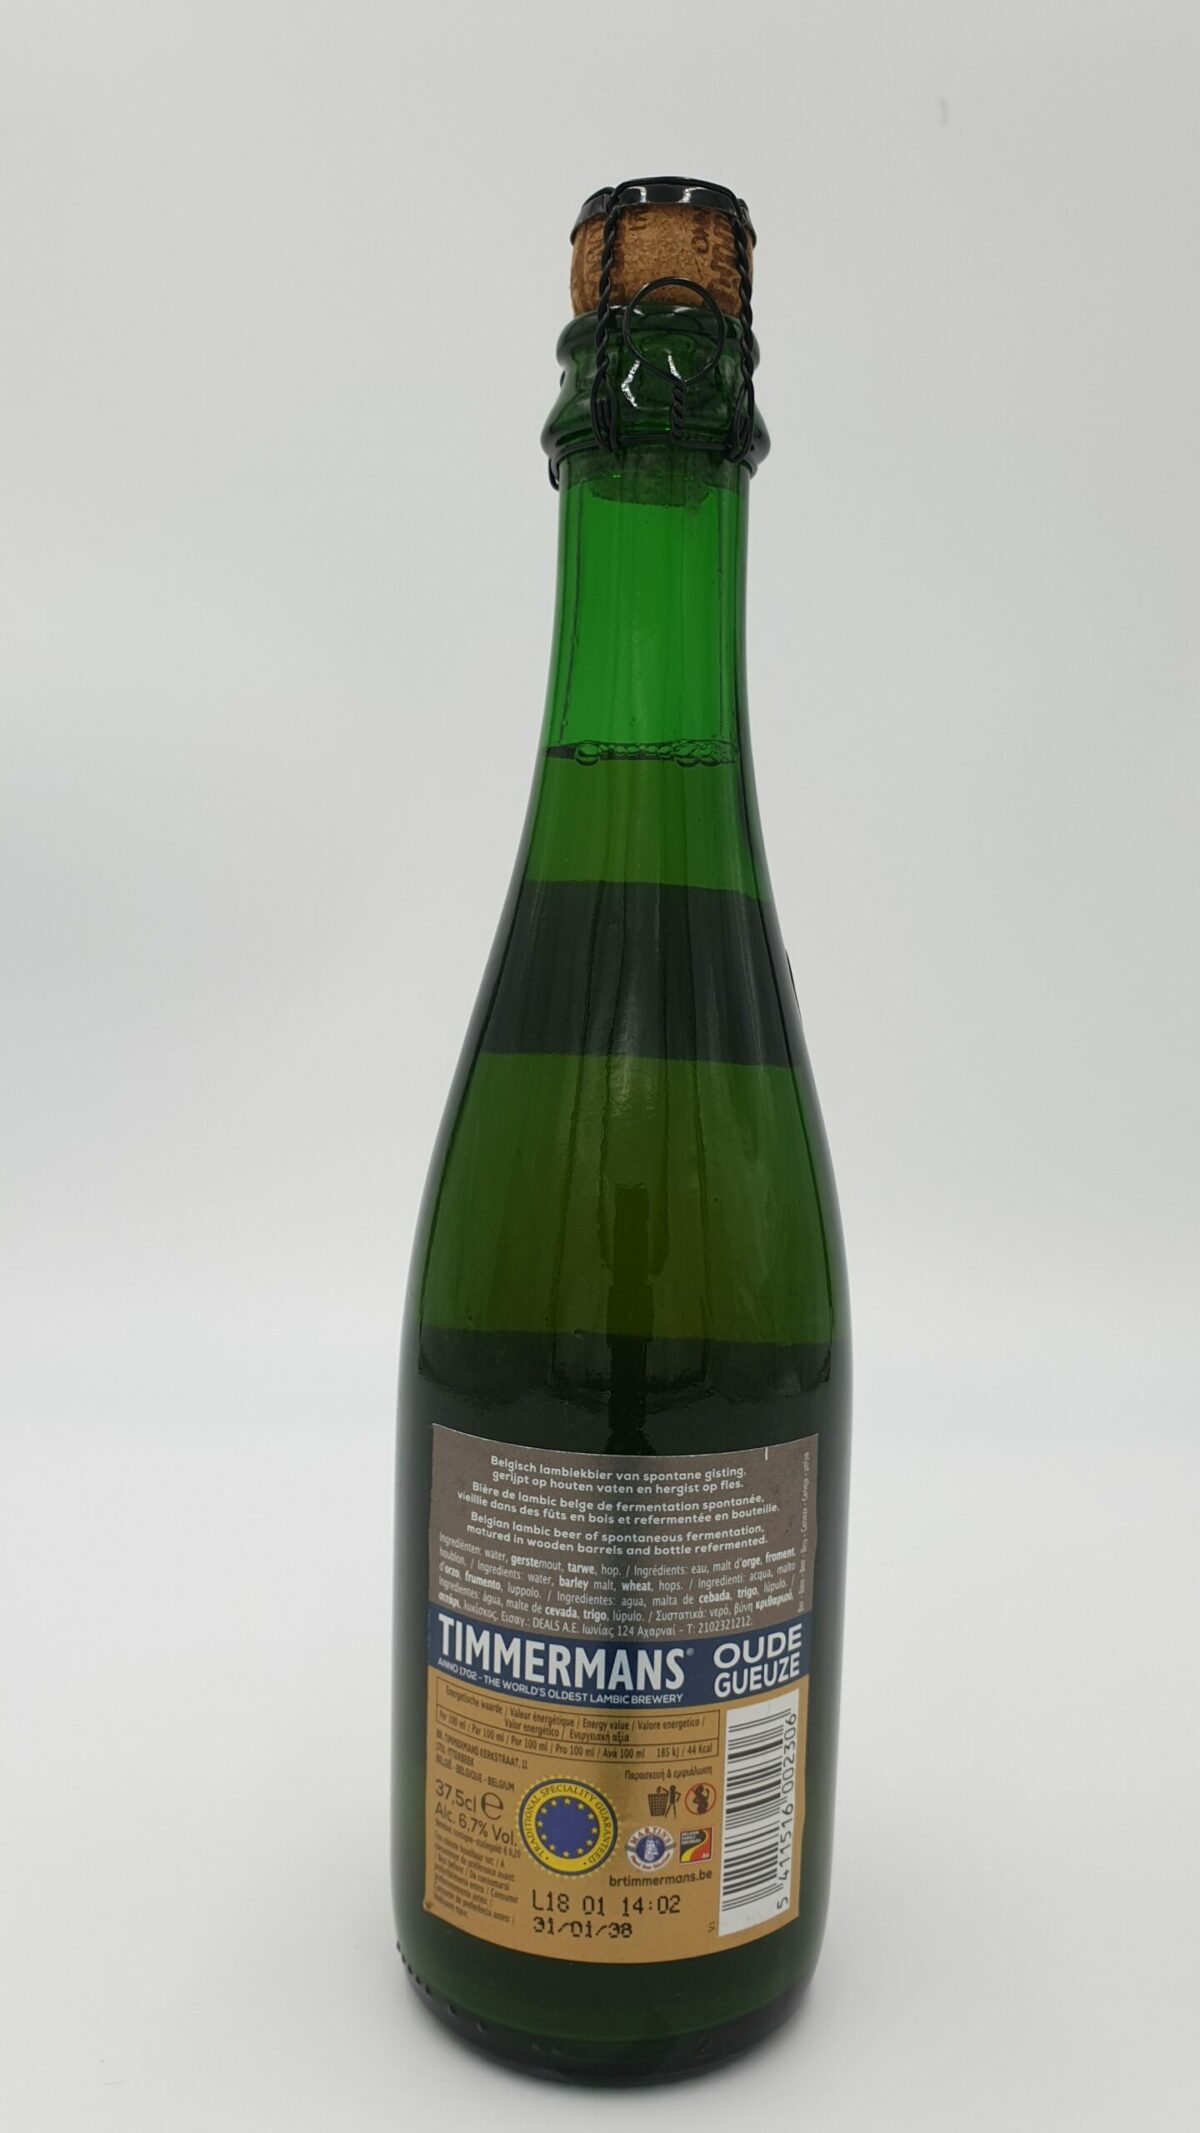 timmermans oude gueuze